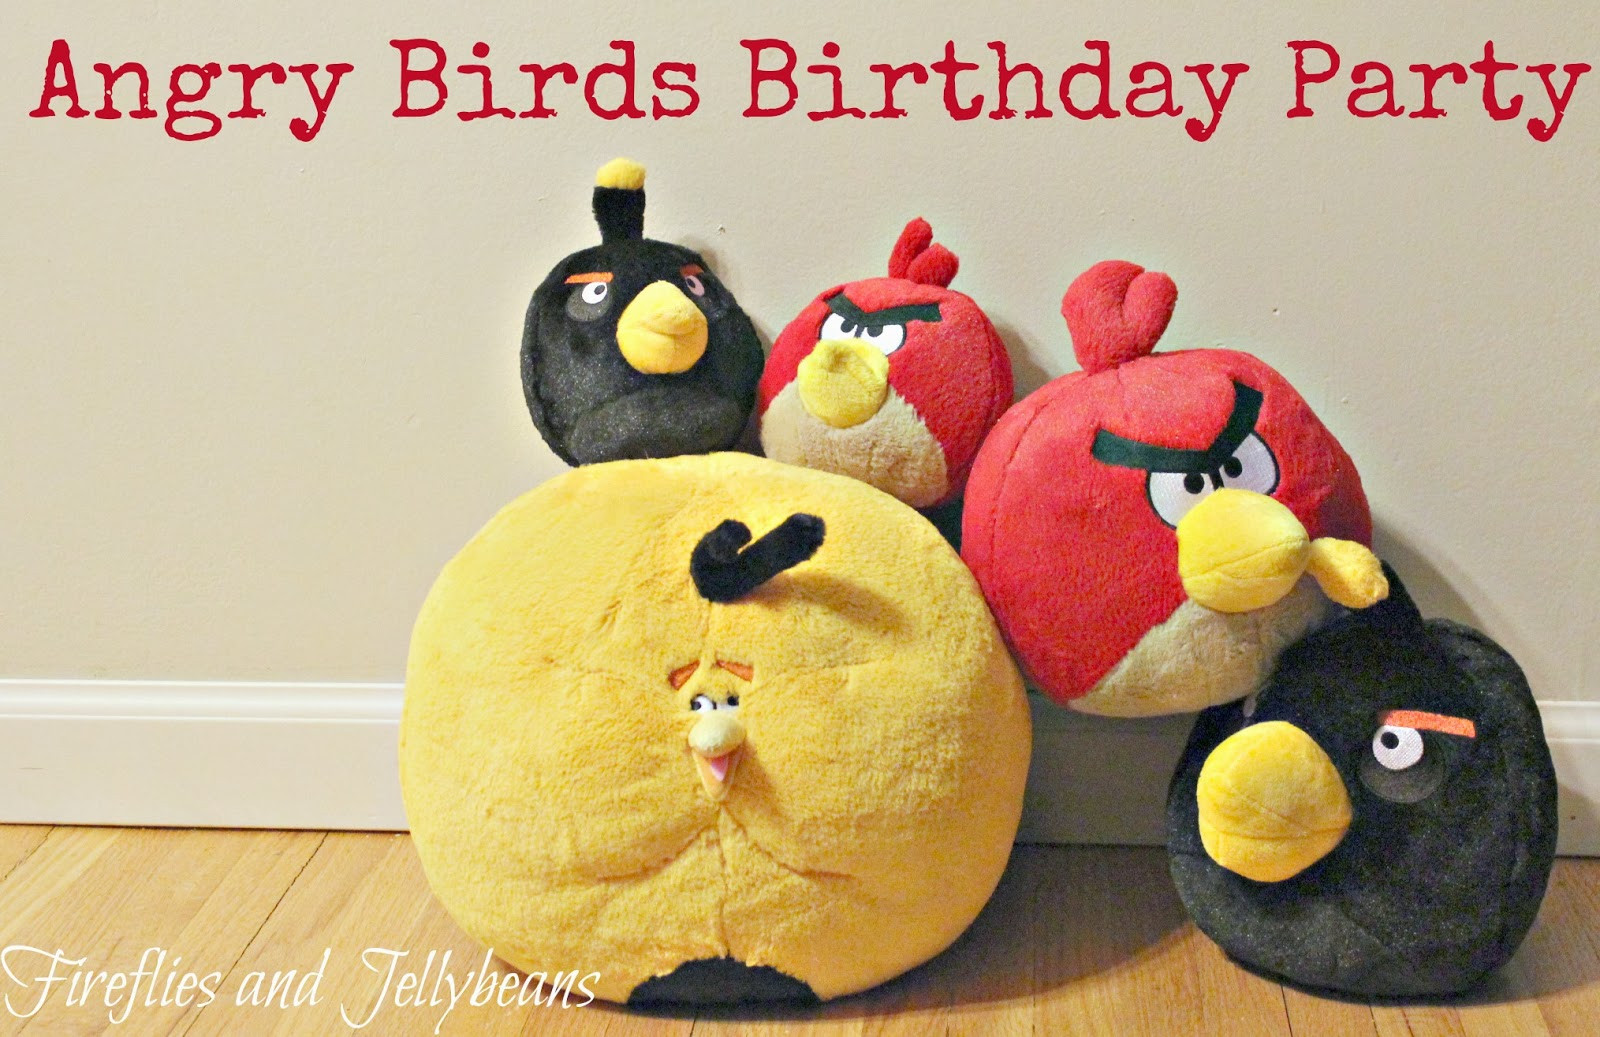 Angry Birds Birthday Party 6
 Fireflies and Jellybeans Angry Birds Birthday Party